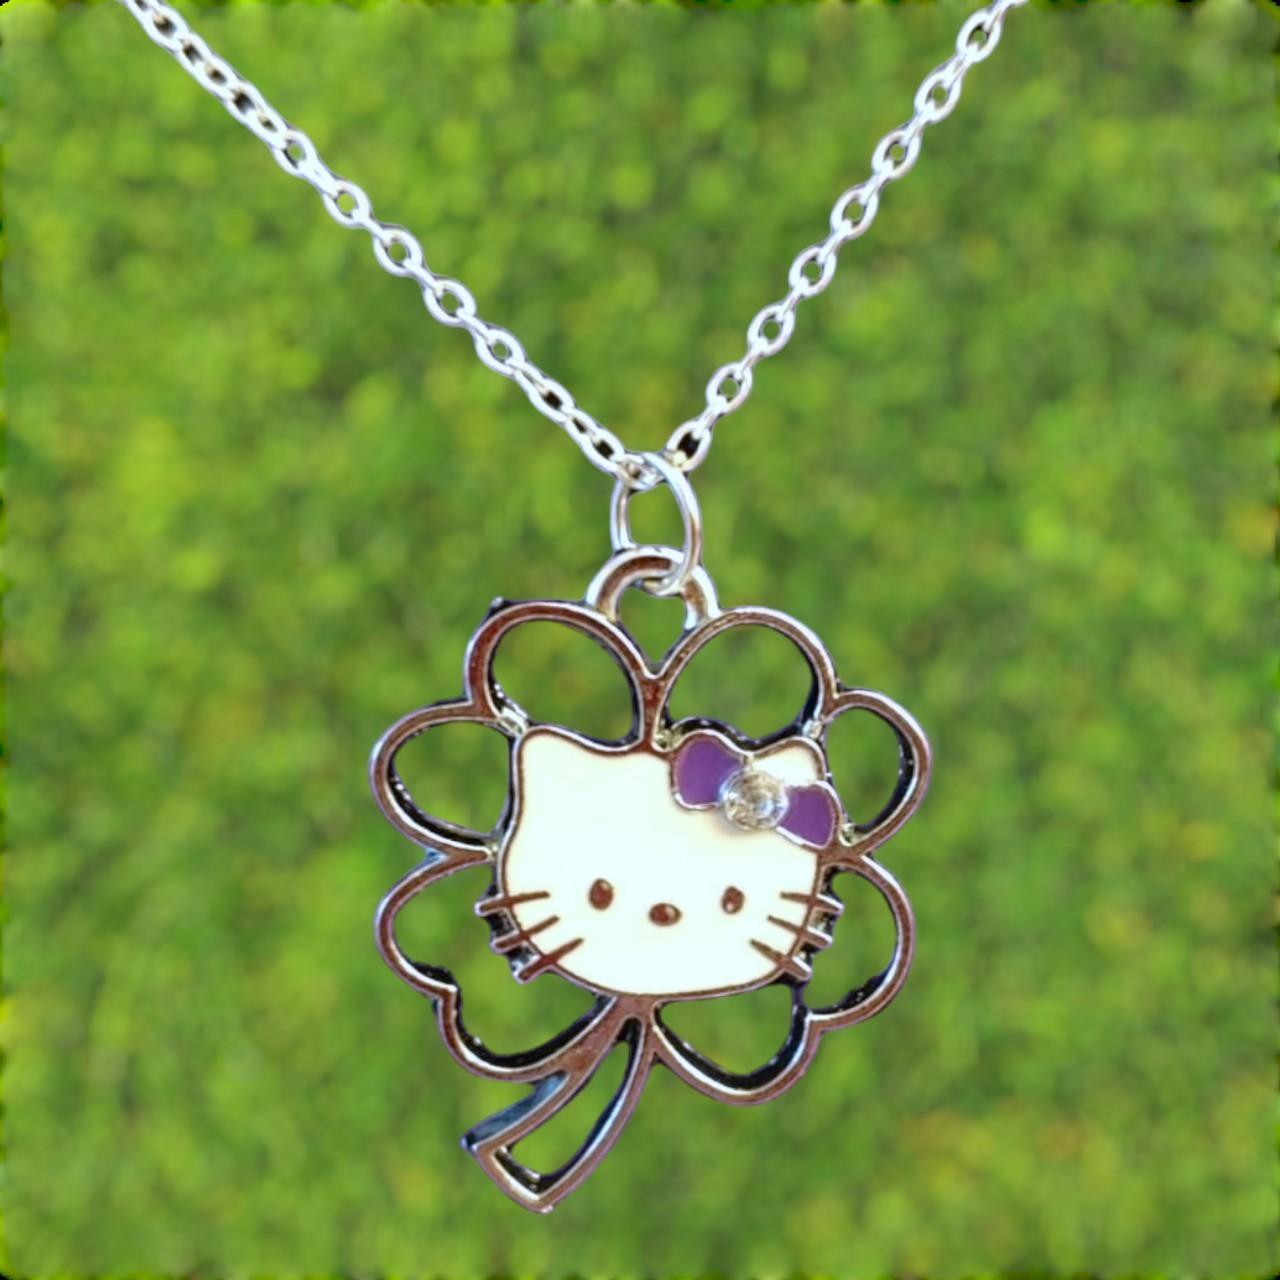 HELLO KITTY CLOVER NECKLACE , ☠︎, ☠︎ This is a handmade...